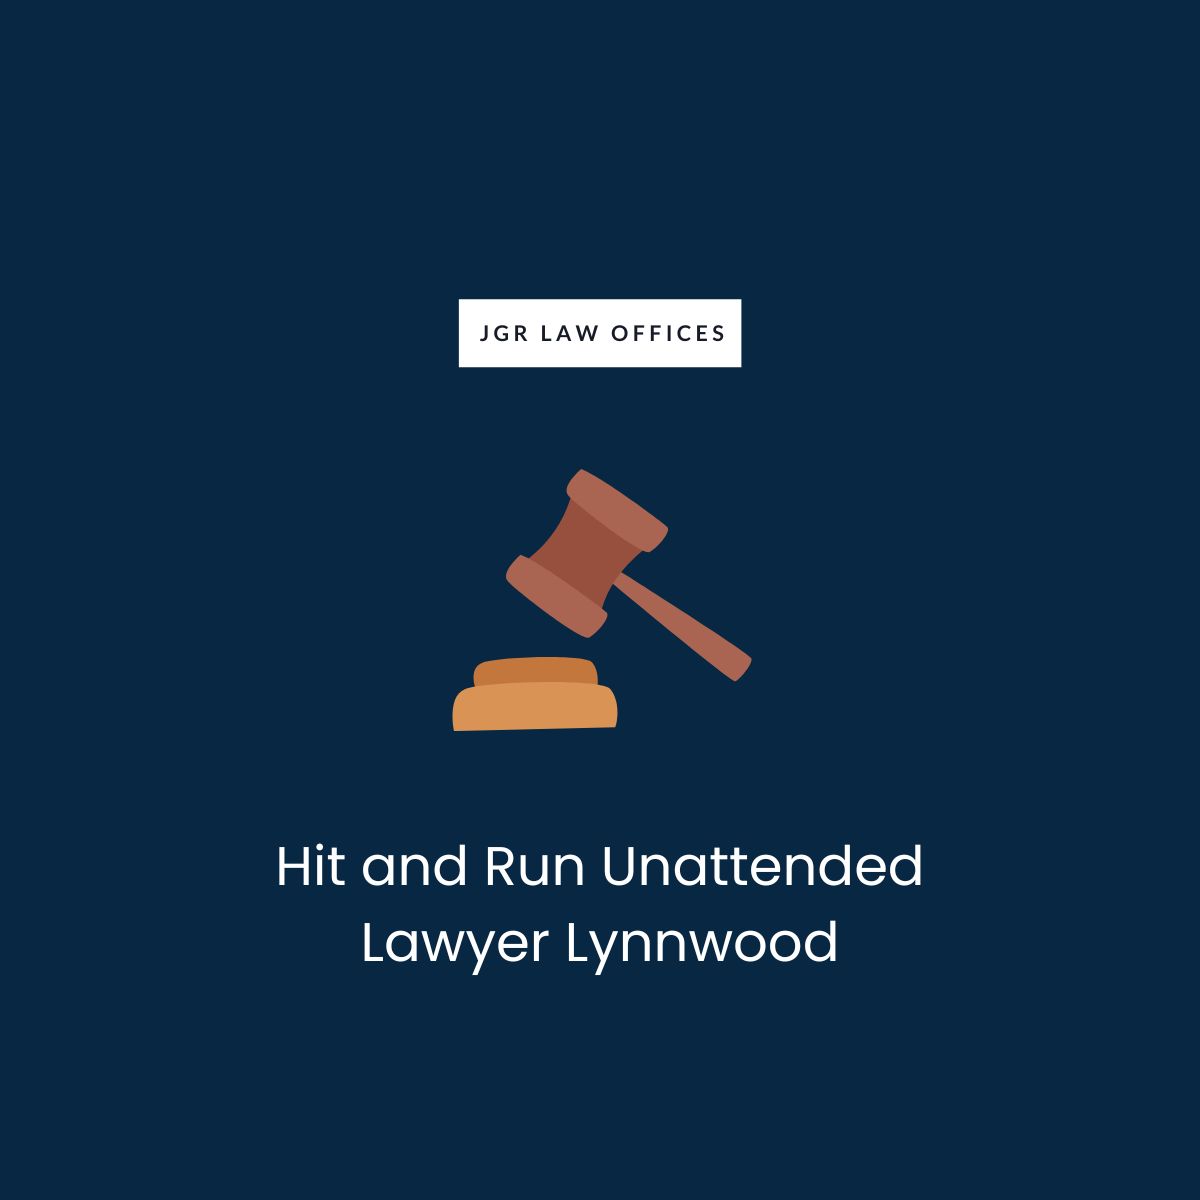 Hit and Run Unattended Attorney Lynnwood